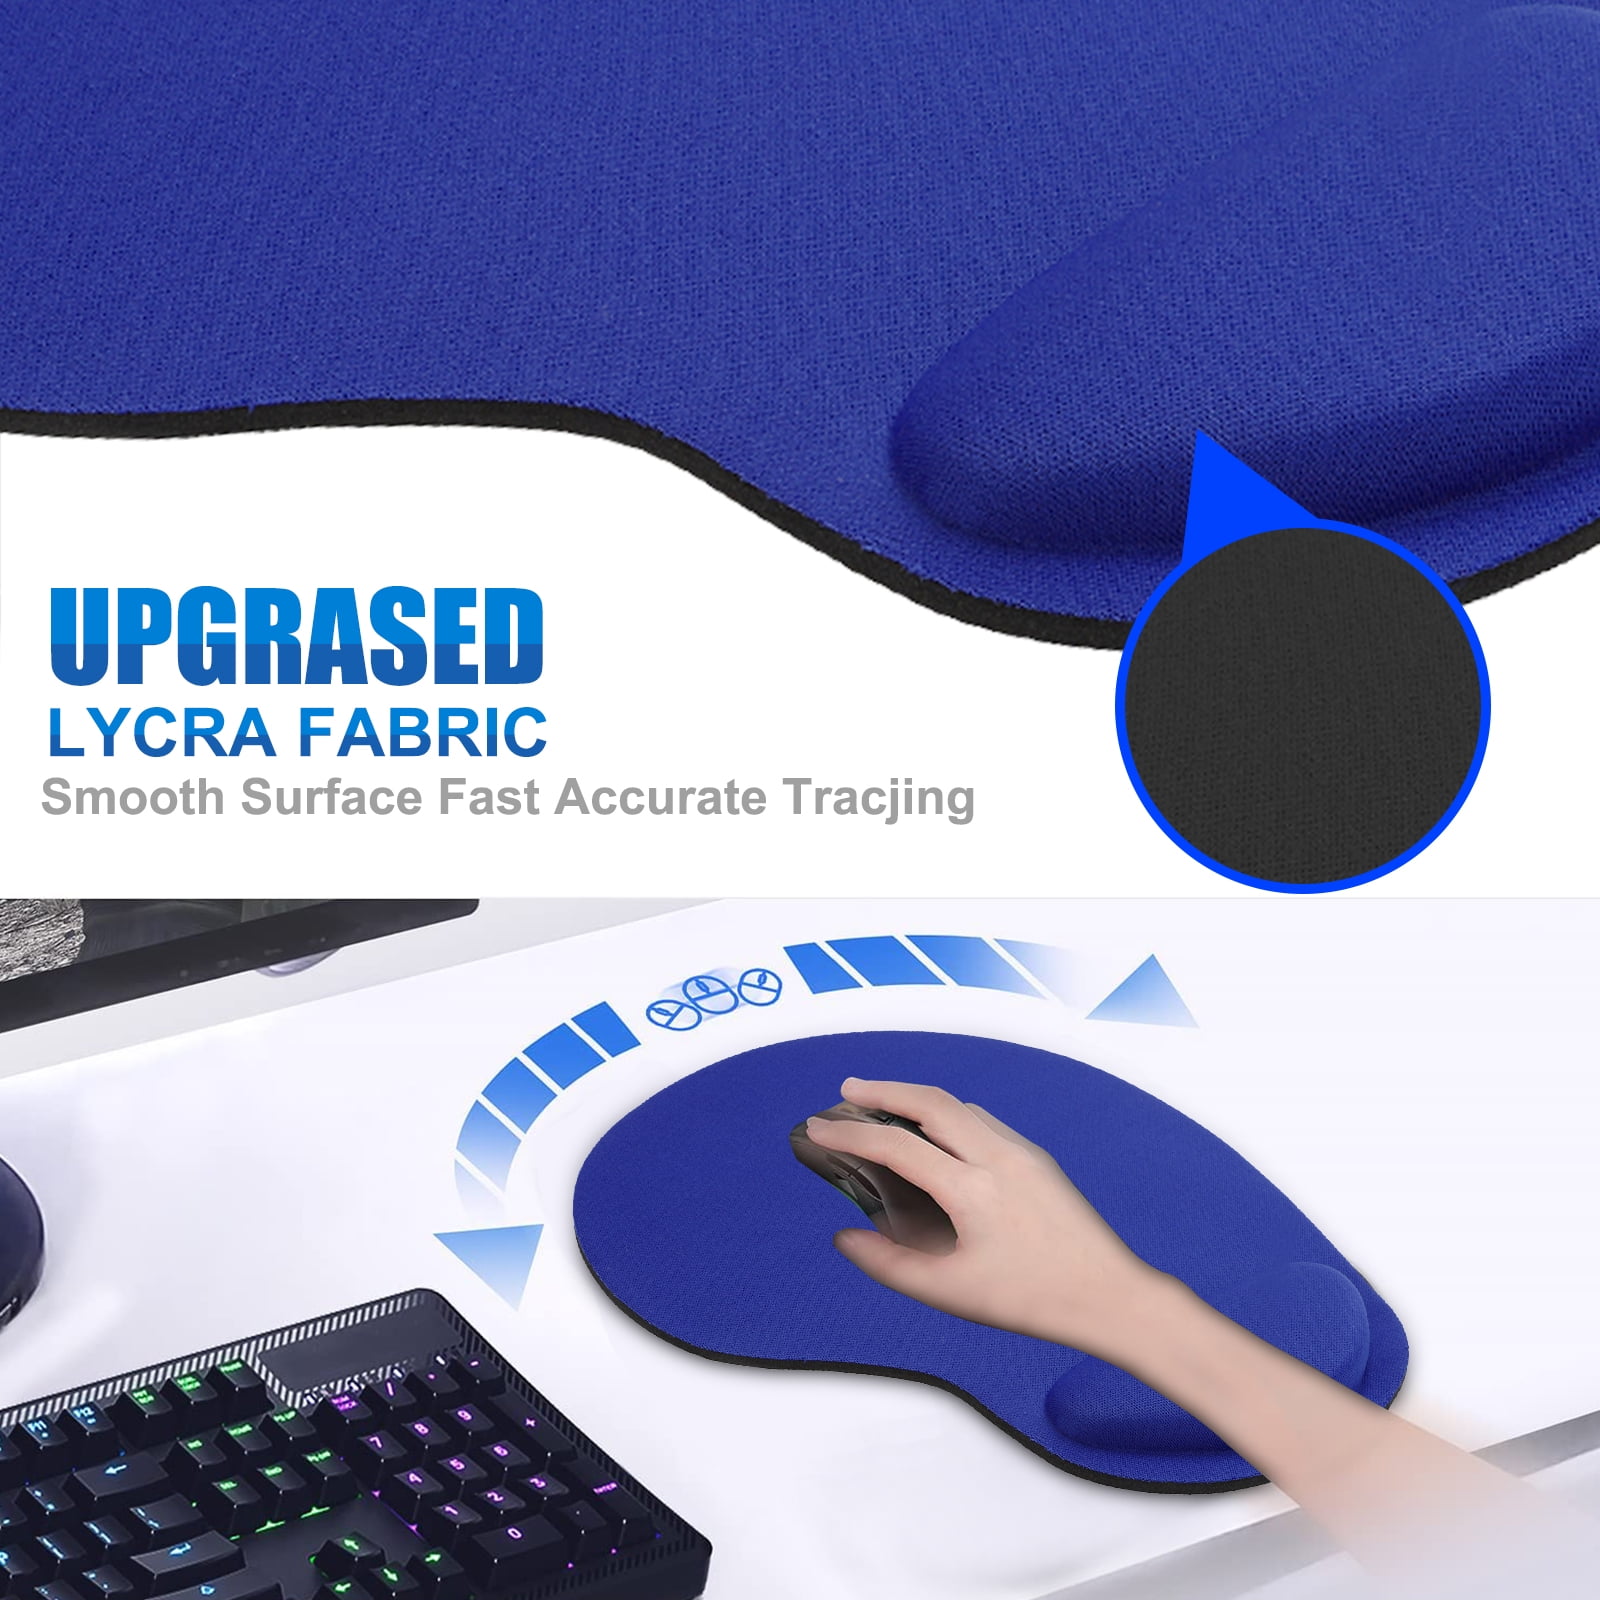 TECKNET Gaming Office Mouse Pad Mat Mousepad with Wrist Support Blue